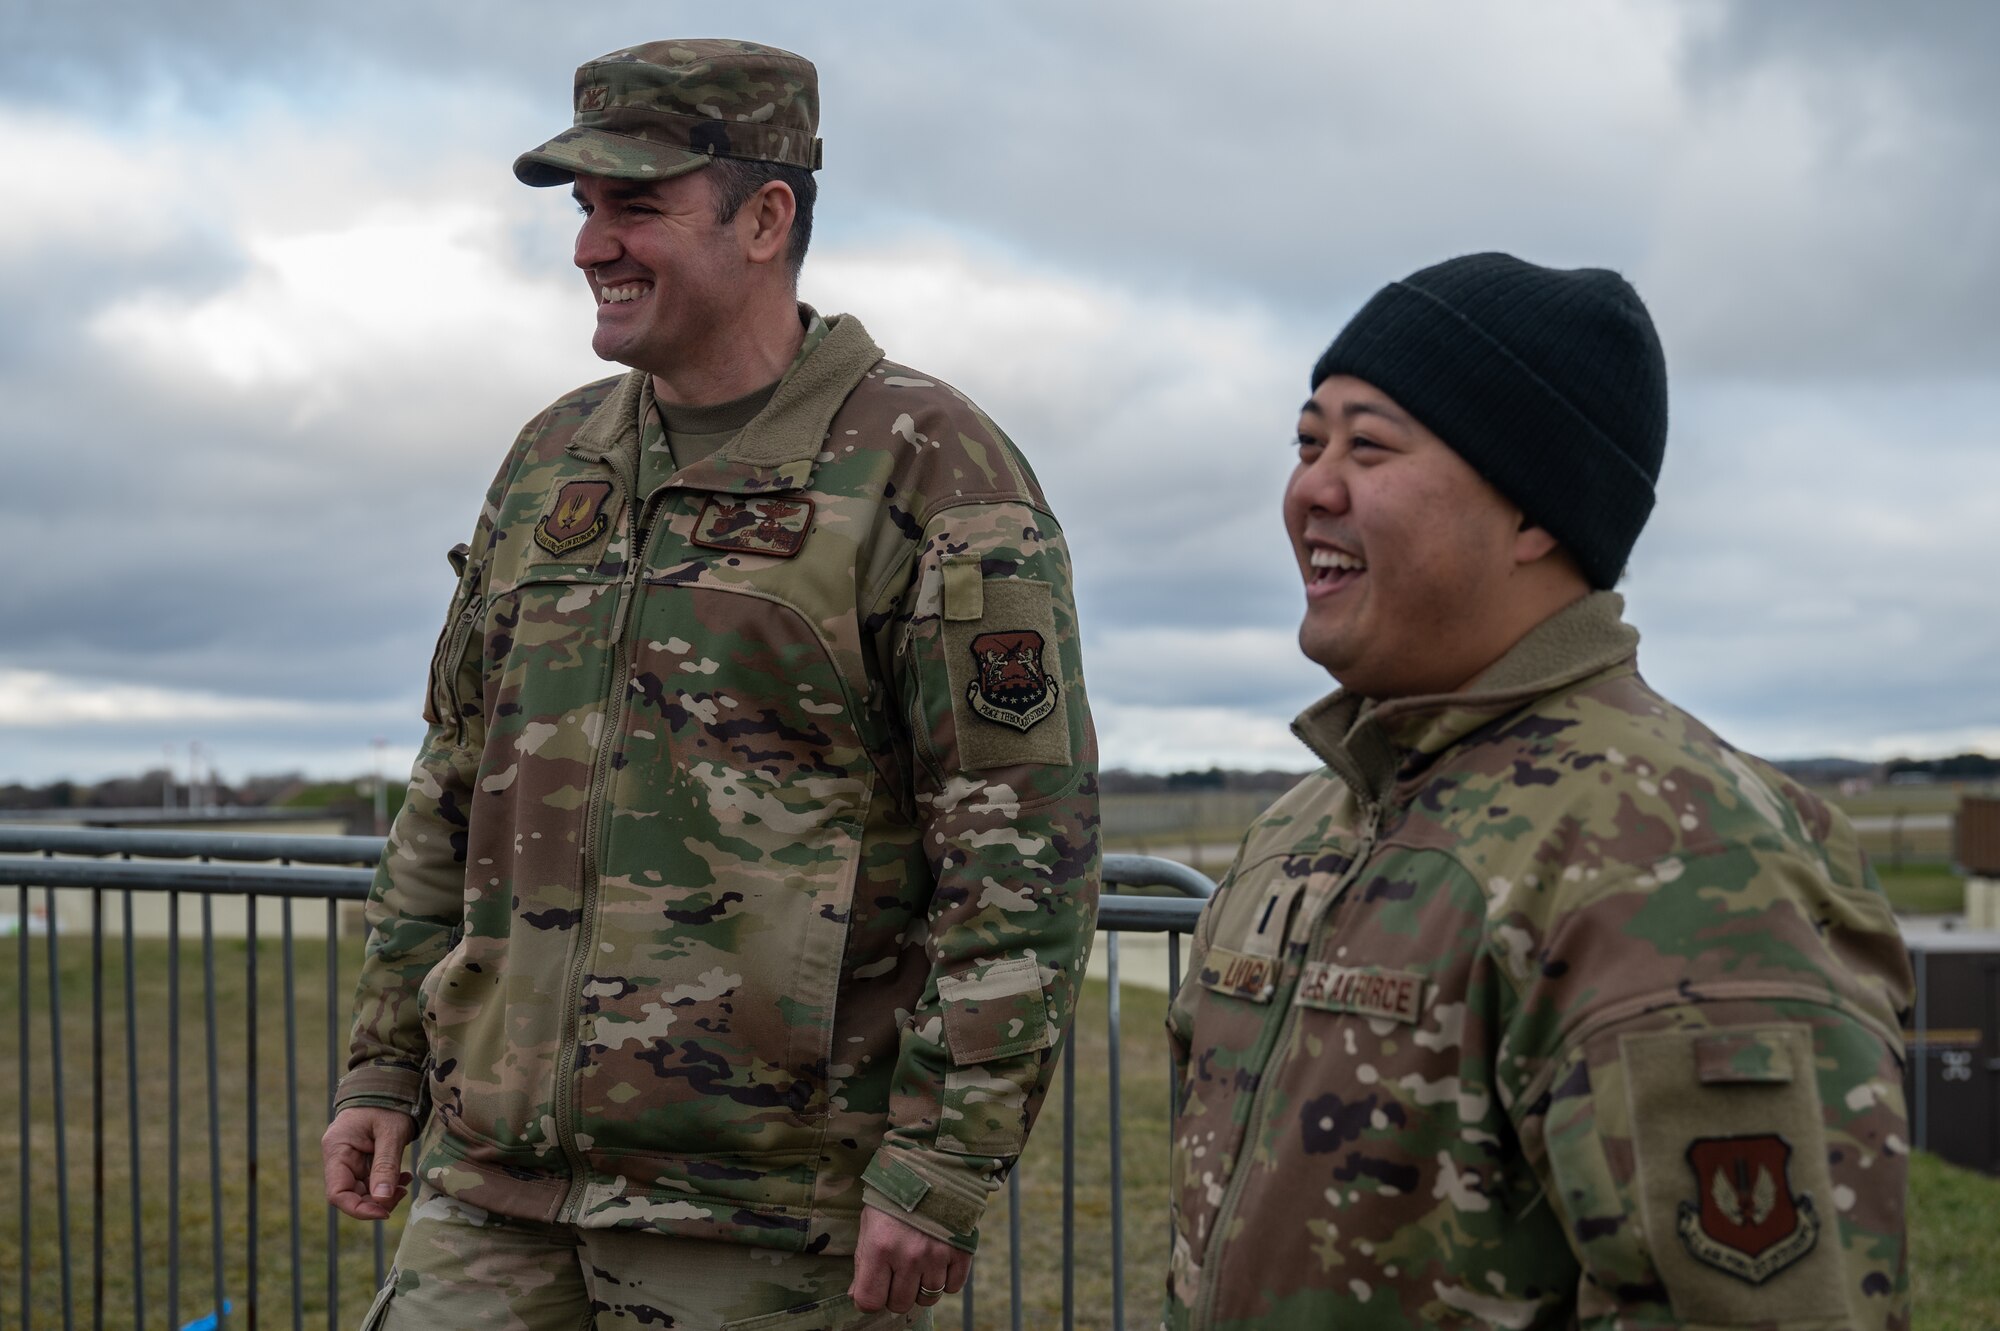 U.S. Air Force Col. Gene Jacobus, left, 100th Air Refueling Wing commander, and 1st Lt. Aris Livica, right, 100th Logistics Readiness Squadron section commander, watches others being hoisted out of an emptied jet fuel storage tank, Feb. 28, 2023, at Royal Air Force Mildenhall, England.